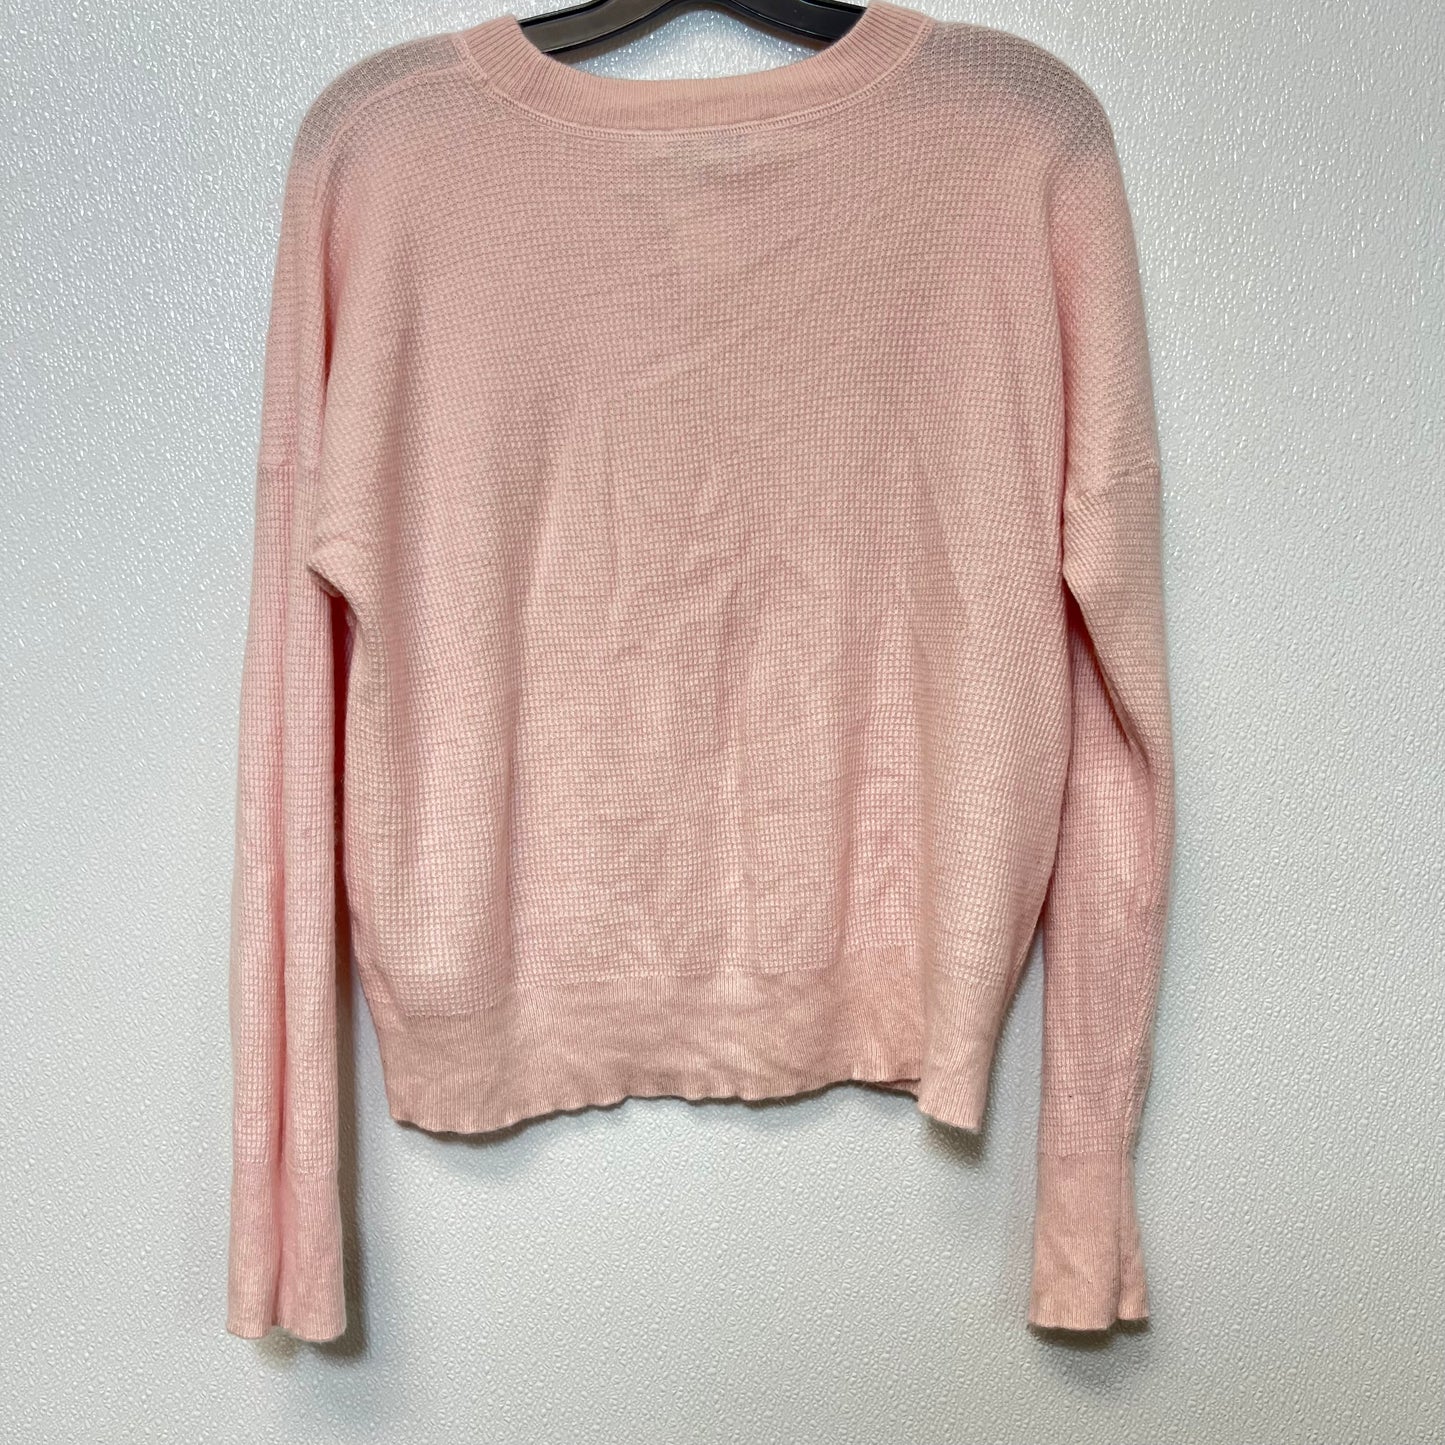 Sweater By Madewell  Size: Xl